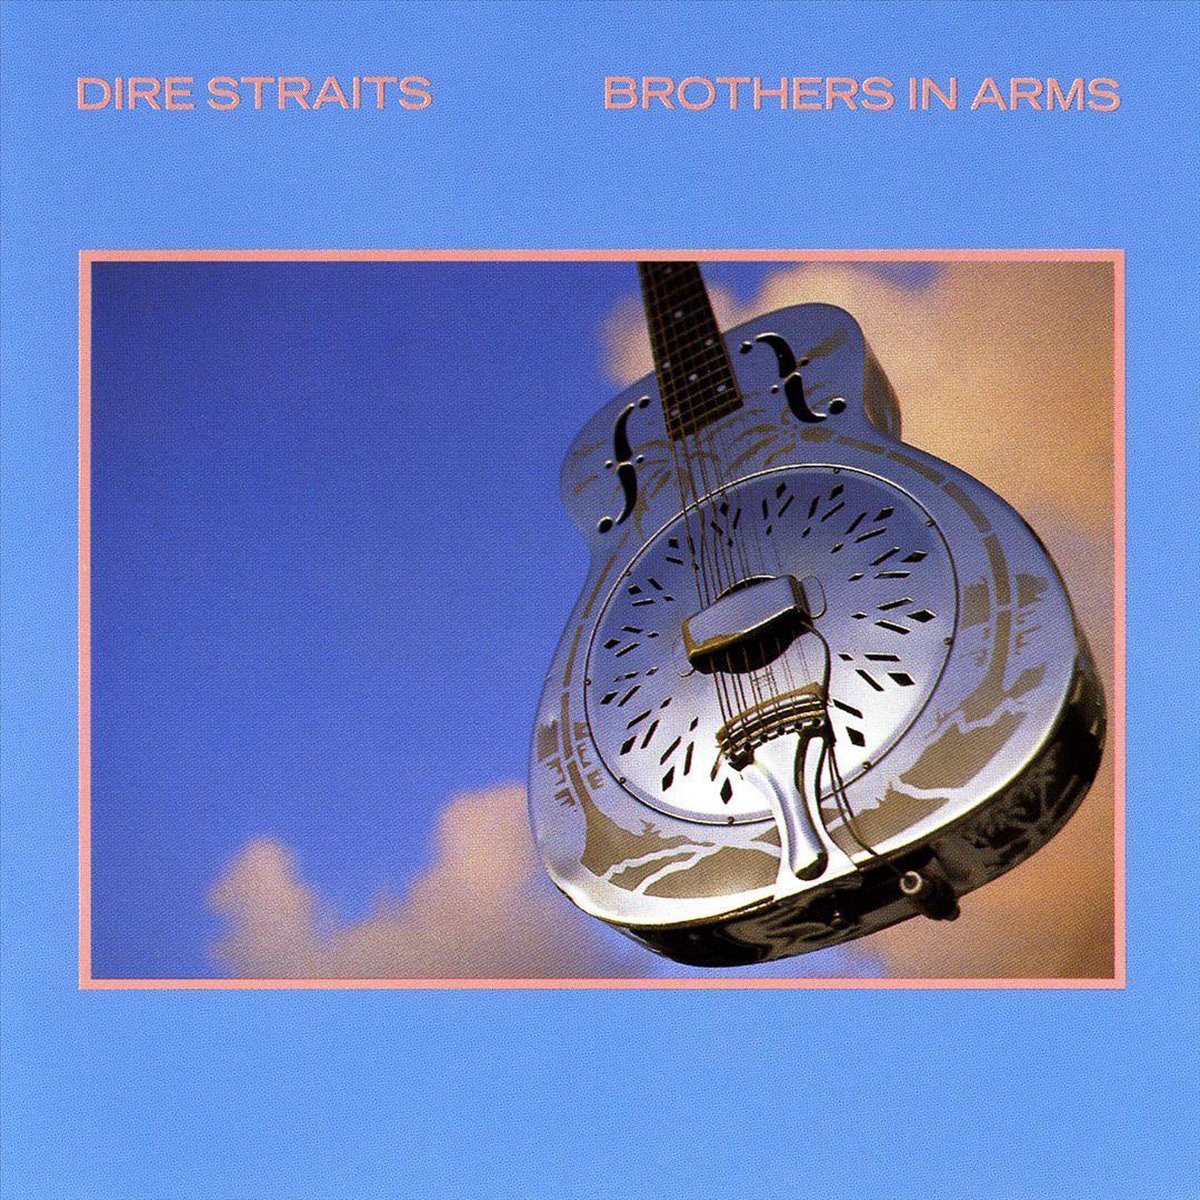 Dire Straits - Brothers In Arms (CD) (Remastered) - Dire Straits